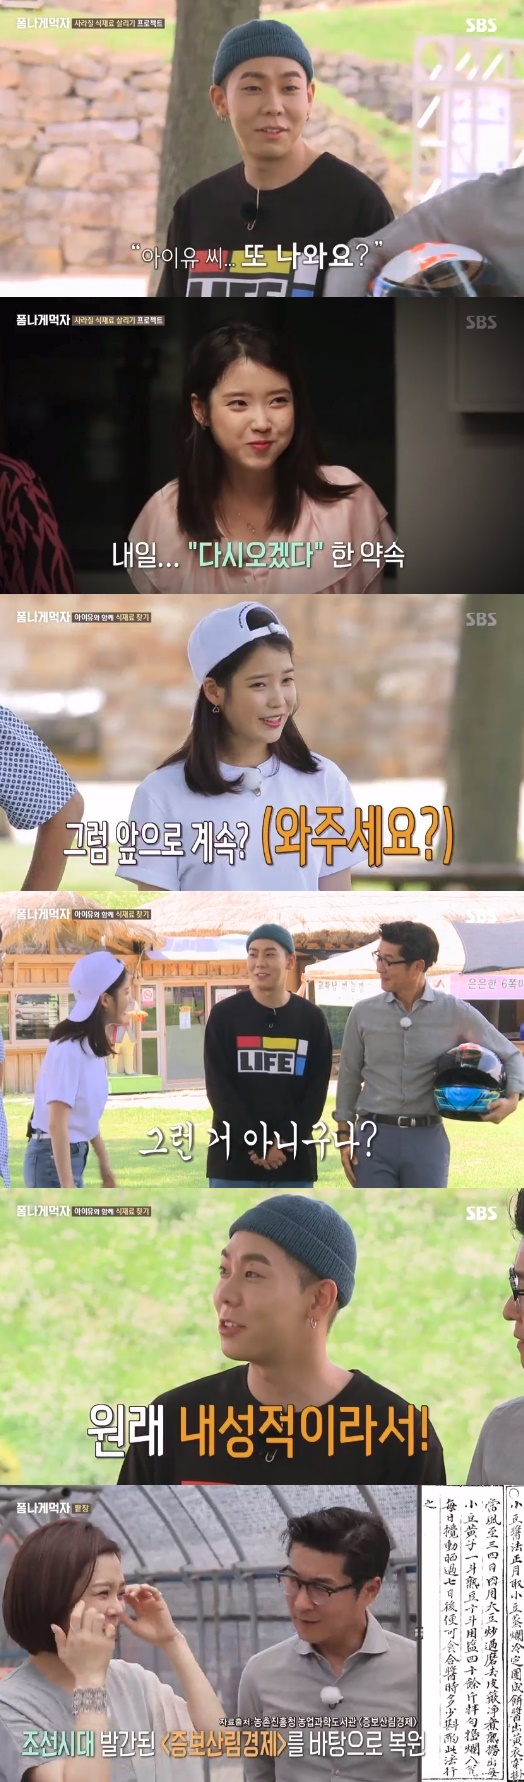 Singer IU also shared two episodes of Have a good meal.On the 14th, SBS Lets eat a meal, a limited guest IU appeared.IU, who was a member of the last broadcast food, was surprised by Kim Sang-joongs Please join me next time and promised to join together.As promised, the IU showed up at the second filming in Hami Eupseong the next day and impressed the MCs.Loco, who was shy about the appearance of the IU, carefully asked him to keep it together.MCs such as Lee Kyung-gyu, Kim Sang-joong, Chaerim, and Loco and guest IU disappeared from the ingredients of the late Joseon Dynasty and went to the red bean paste that they restored the old book four or five years ago.Photo: SBS